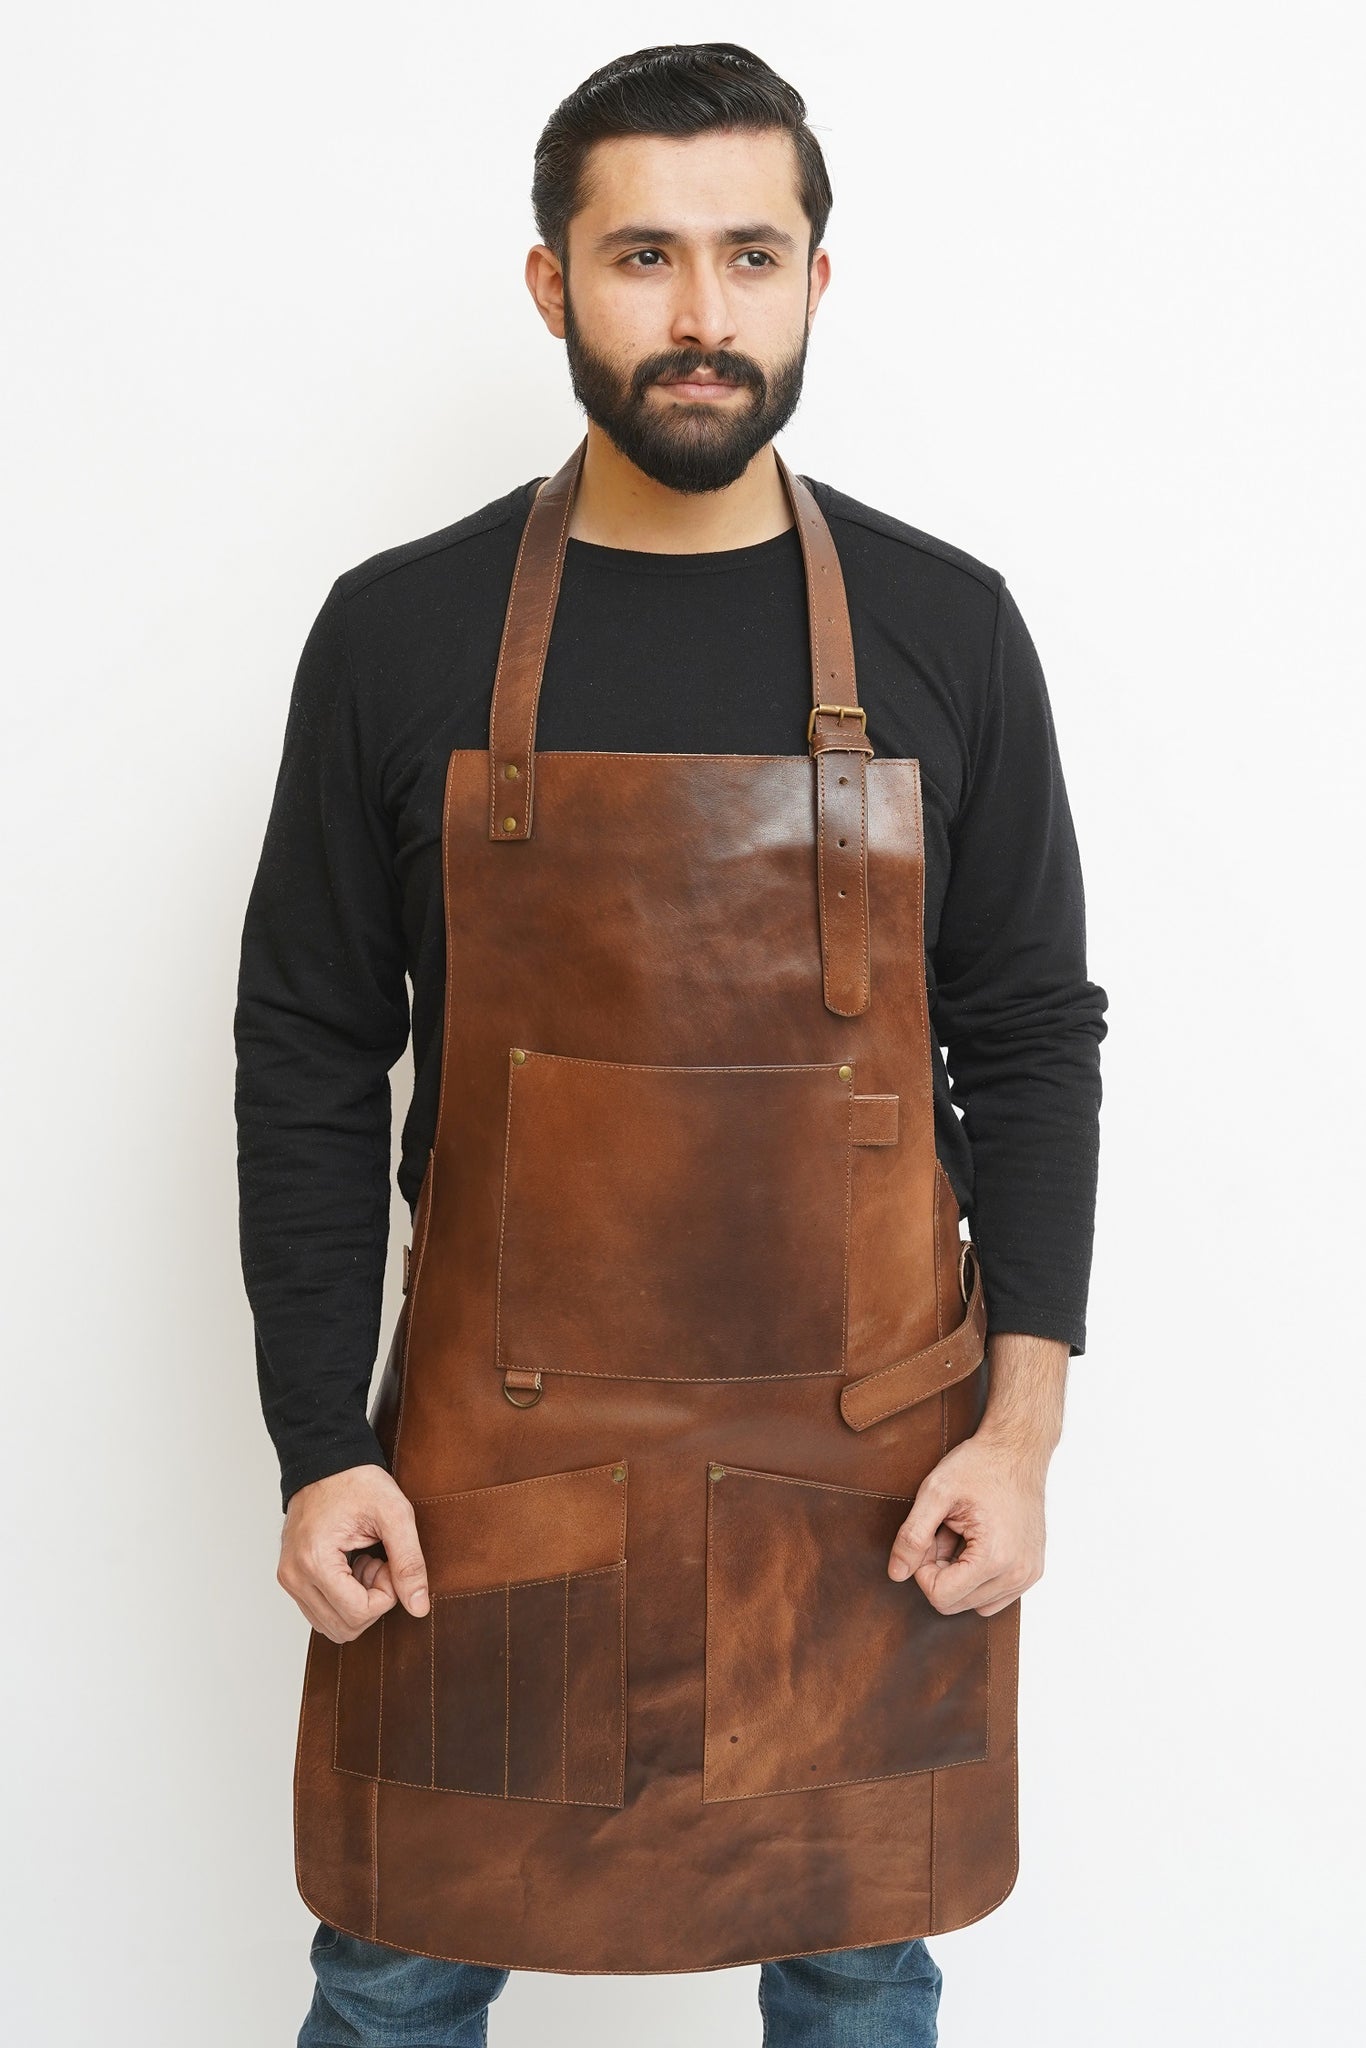 Leather Aprons, Leather Woodworking Apron, Leather Butcher Apron, Leather Chef Apron, Leather Blacksmith Apron, Leather Barber Apron, Leather BBQ Apron, Leather Carpenters Apron, Leather Welding Apron, Handmade Leather Apron, Mens Leather Apron